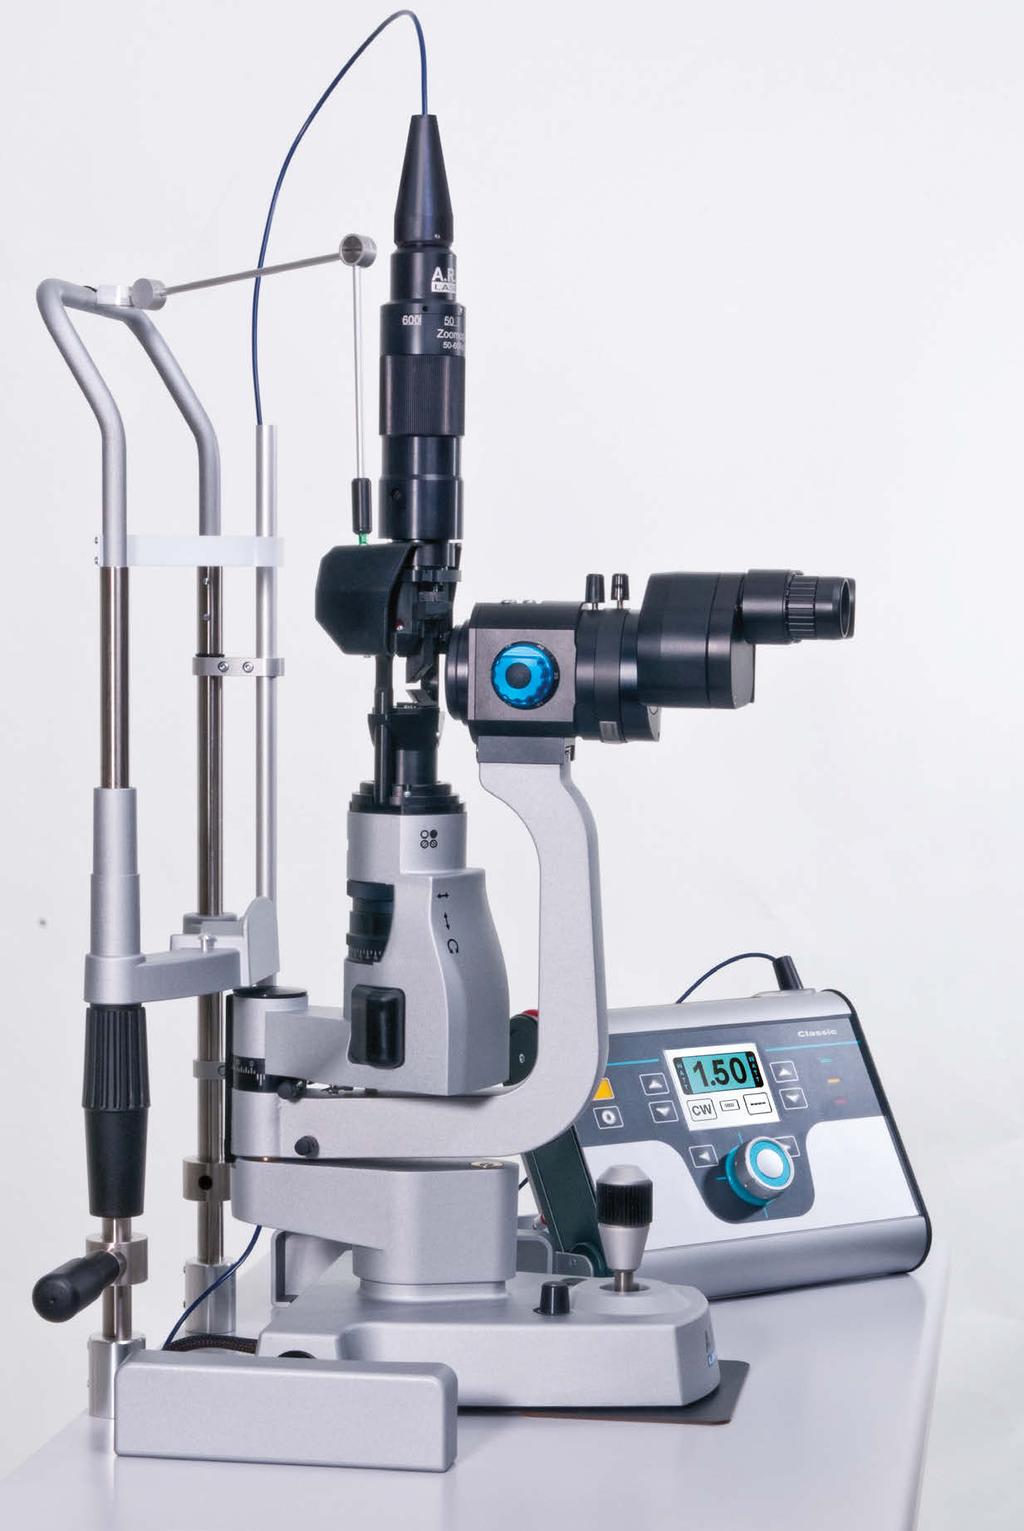 The laser optic is integrated into the slit illumination to assure coaxial viewing with laser delivery.